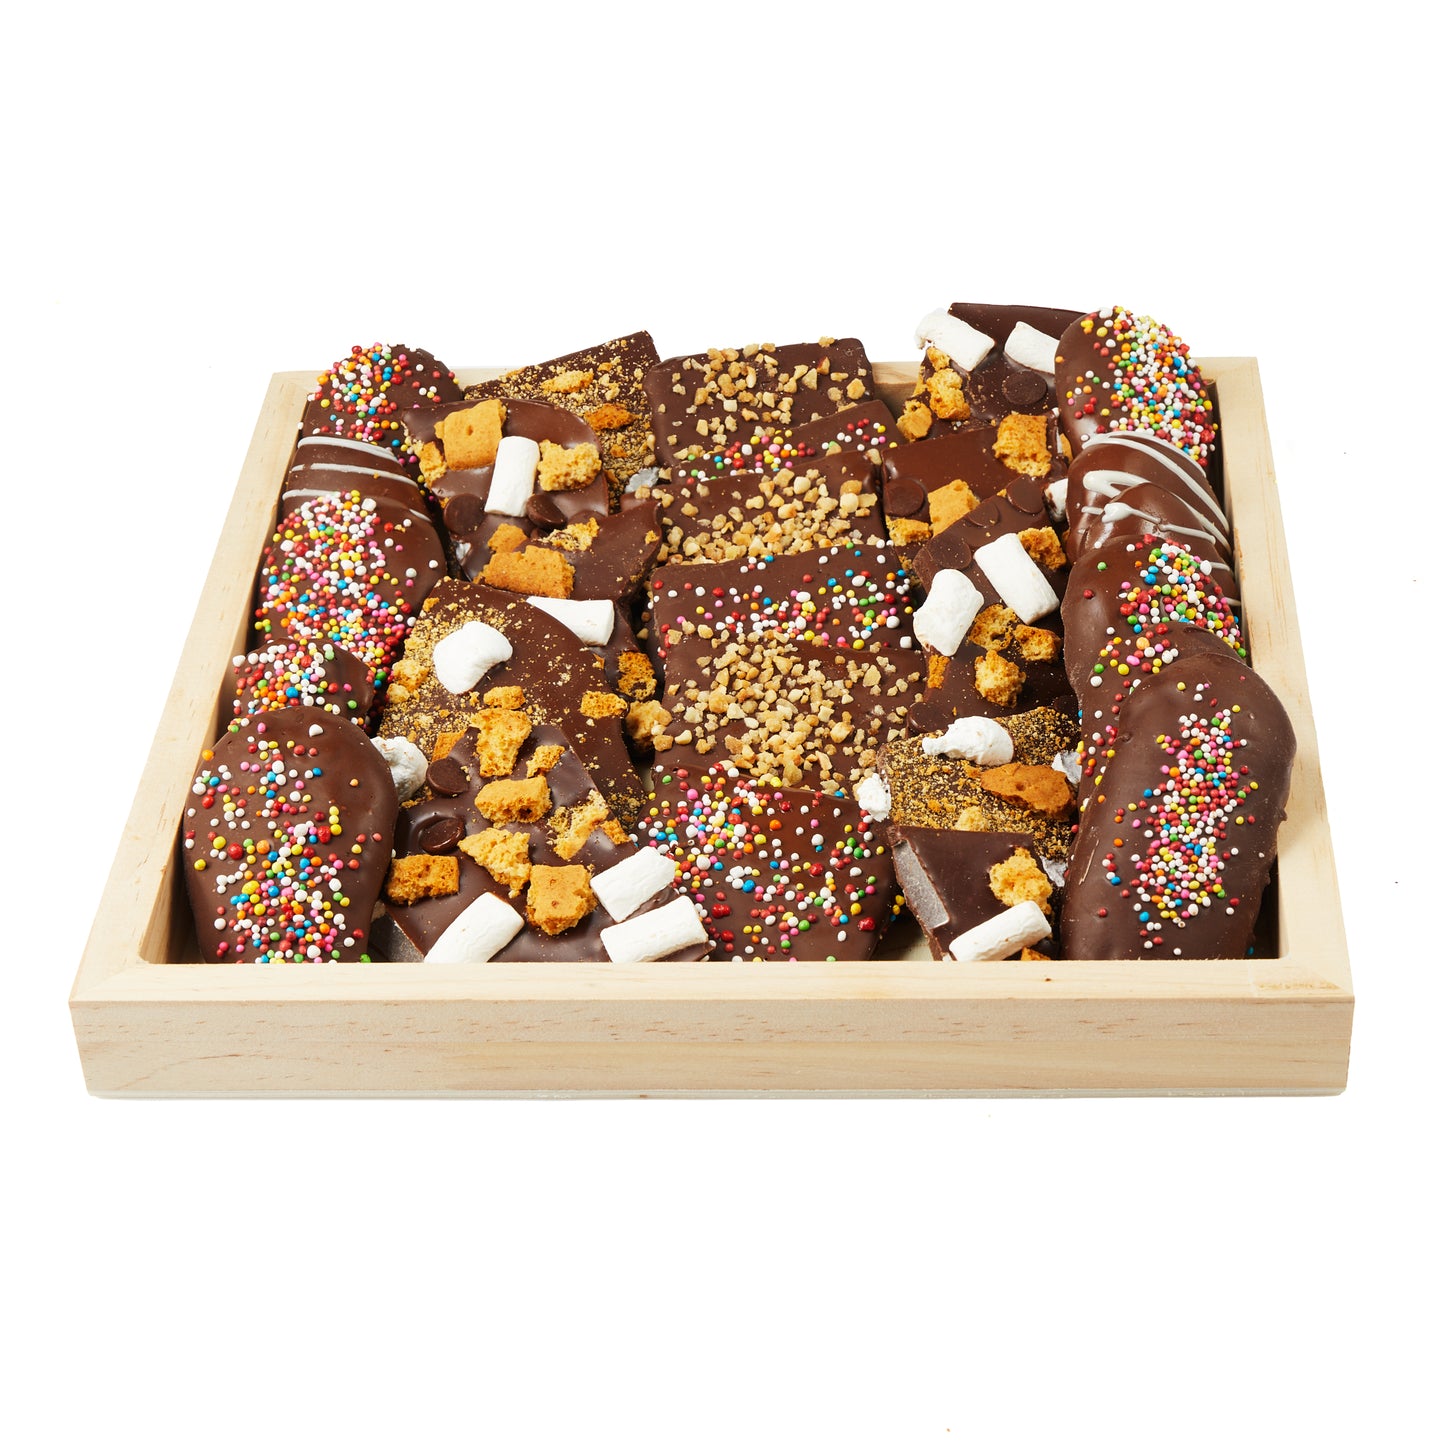 Choco-Passover Party Platter